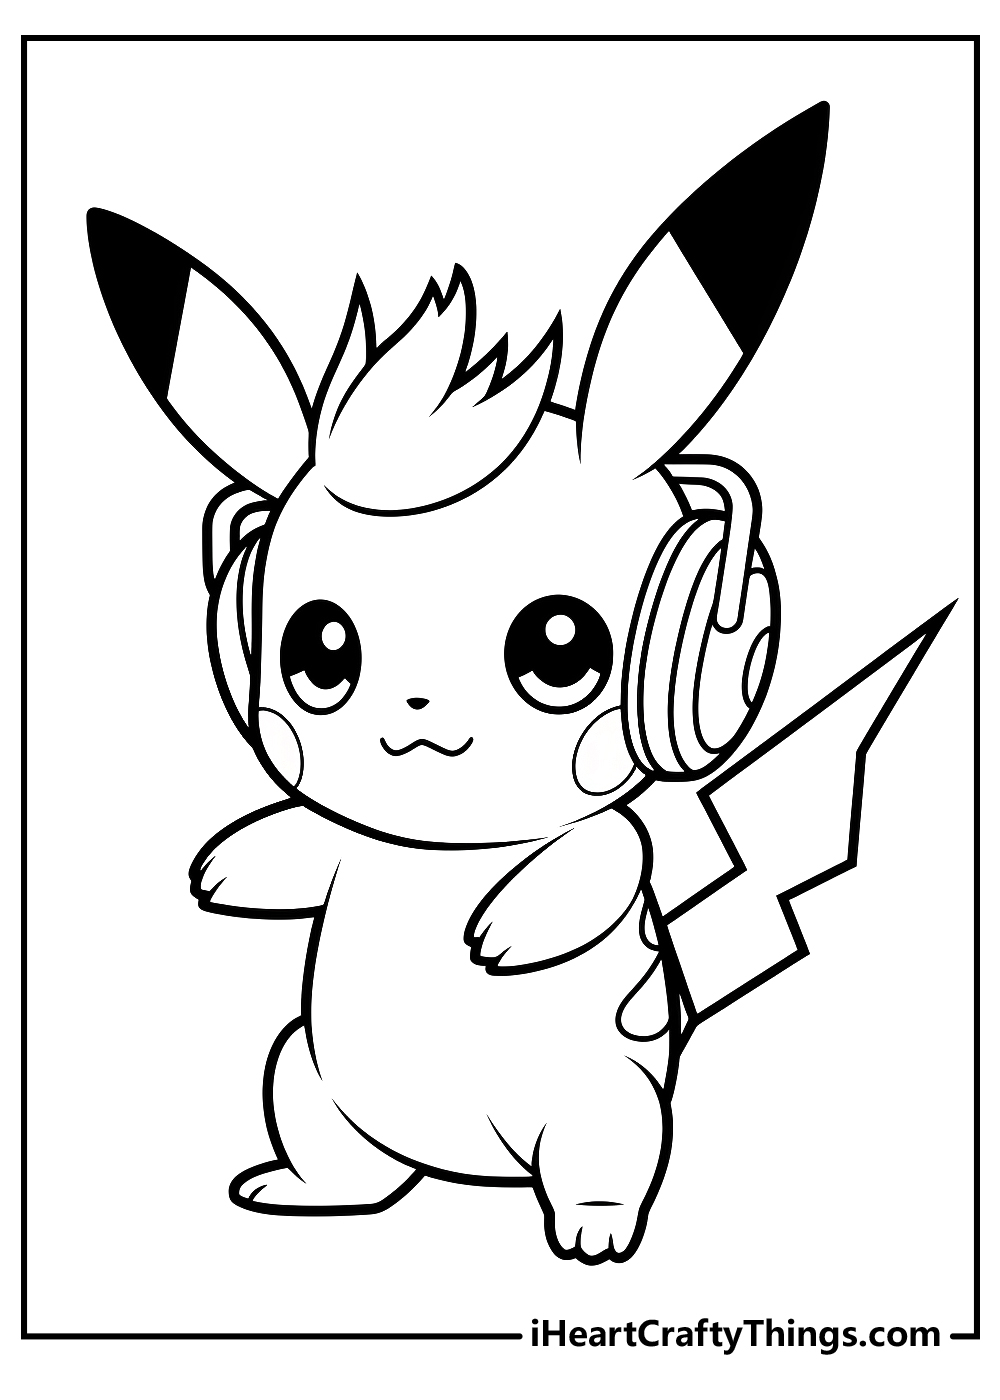 How To Draw Pikachu, Step by Step, Drawing Guide, by Dawn - DragoArt